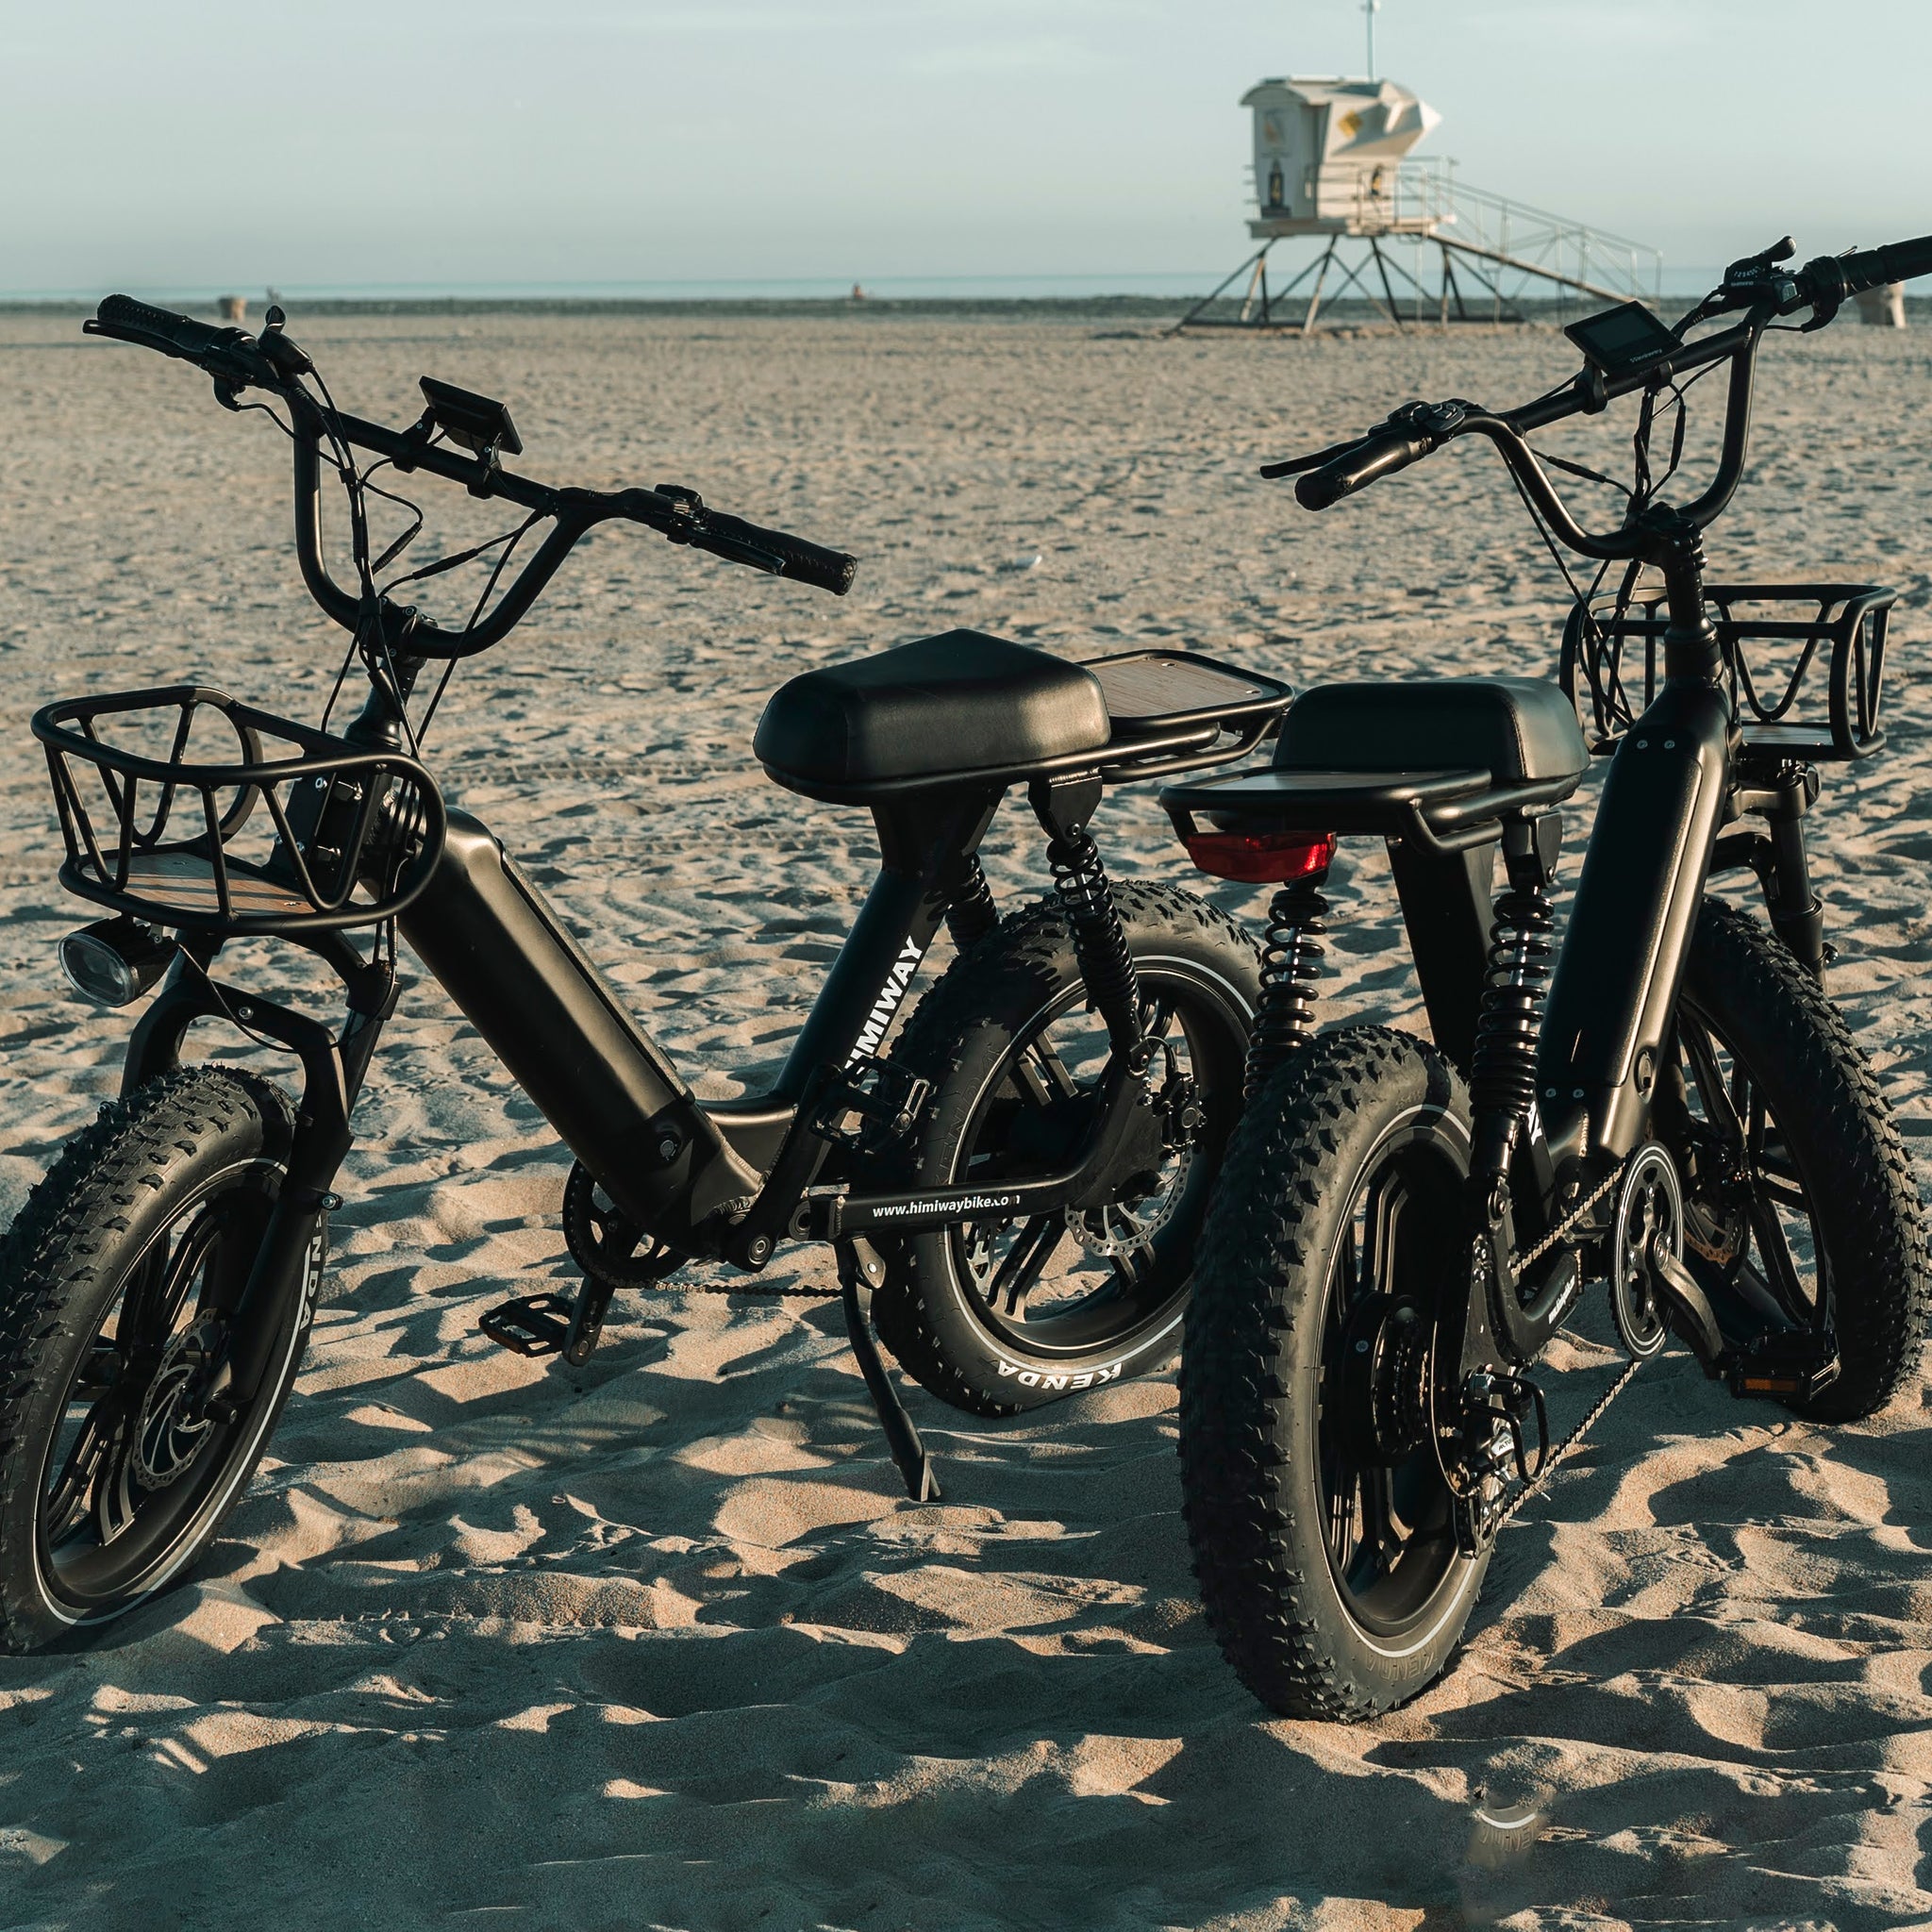 Himiway bikes on the beach